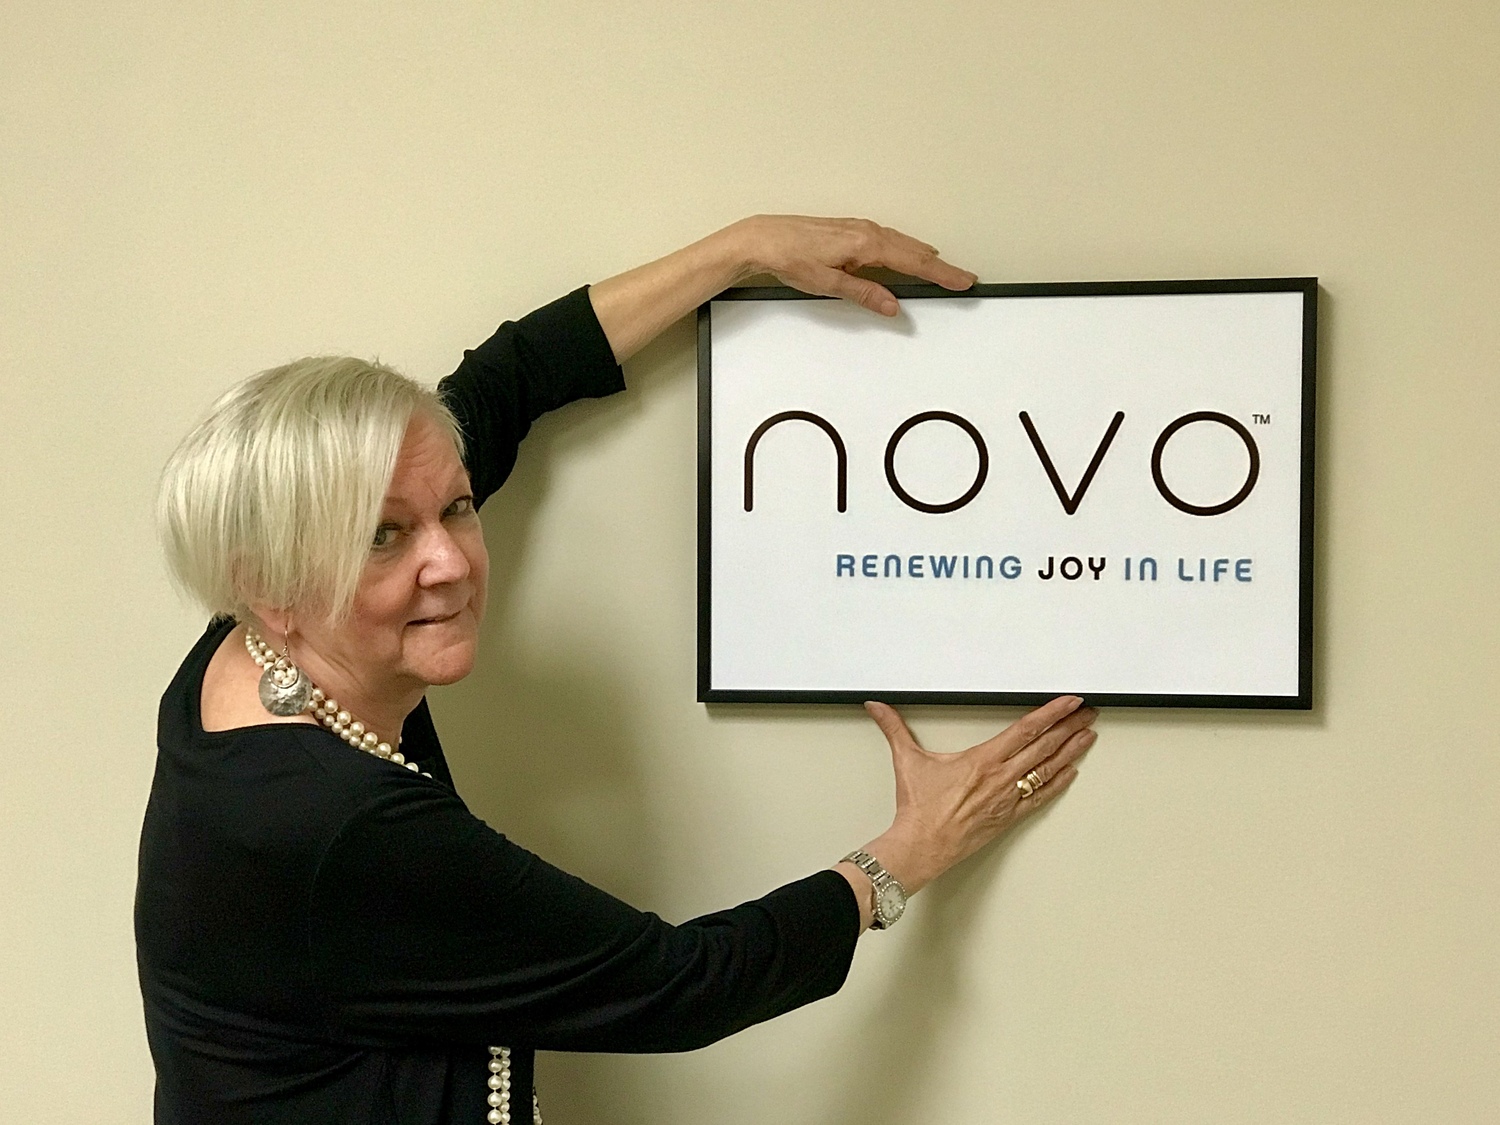 Gallery Photo of Dr. Alden putting up a photo of NOVO's logo.